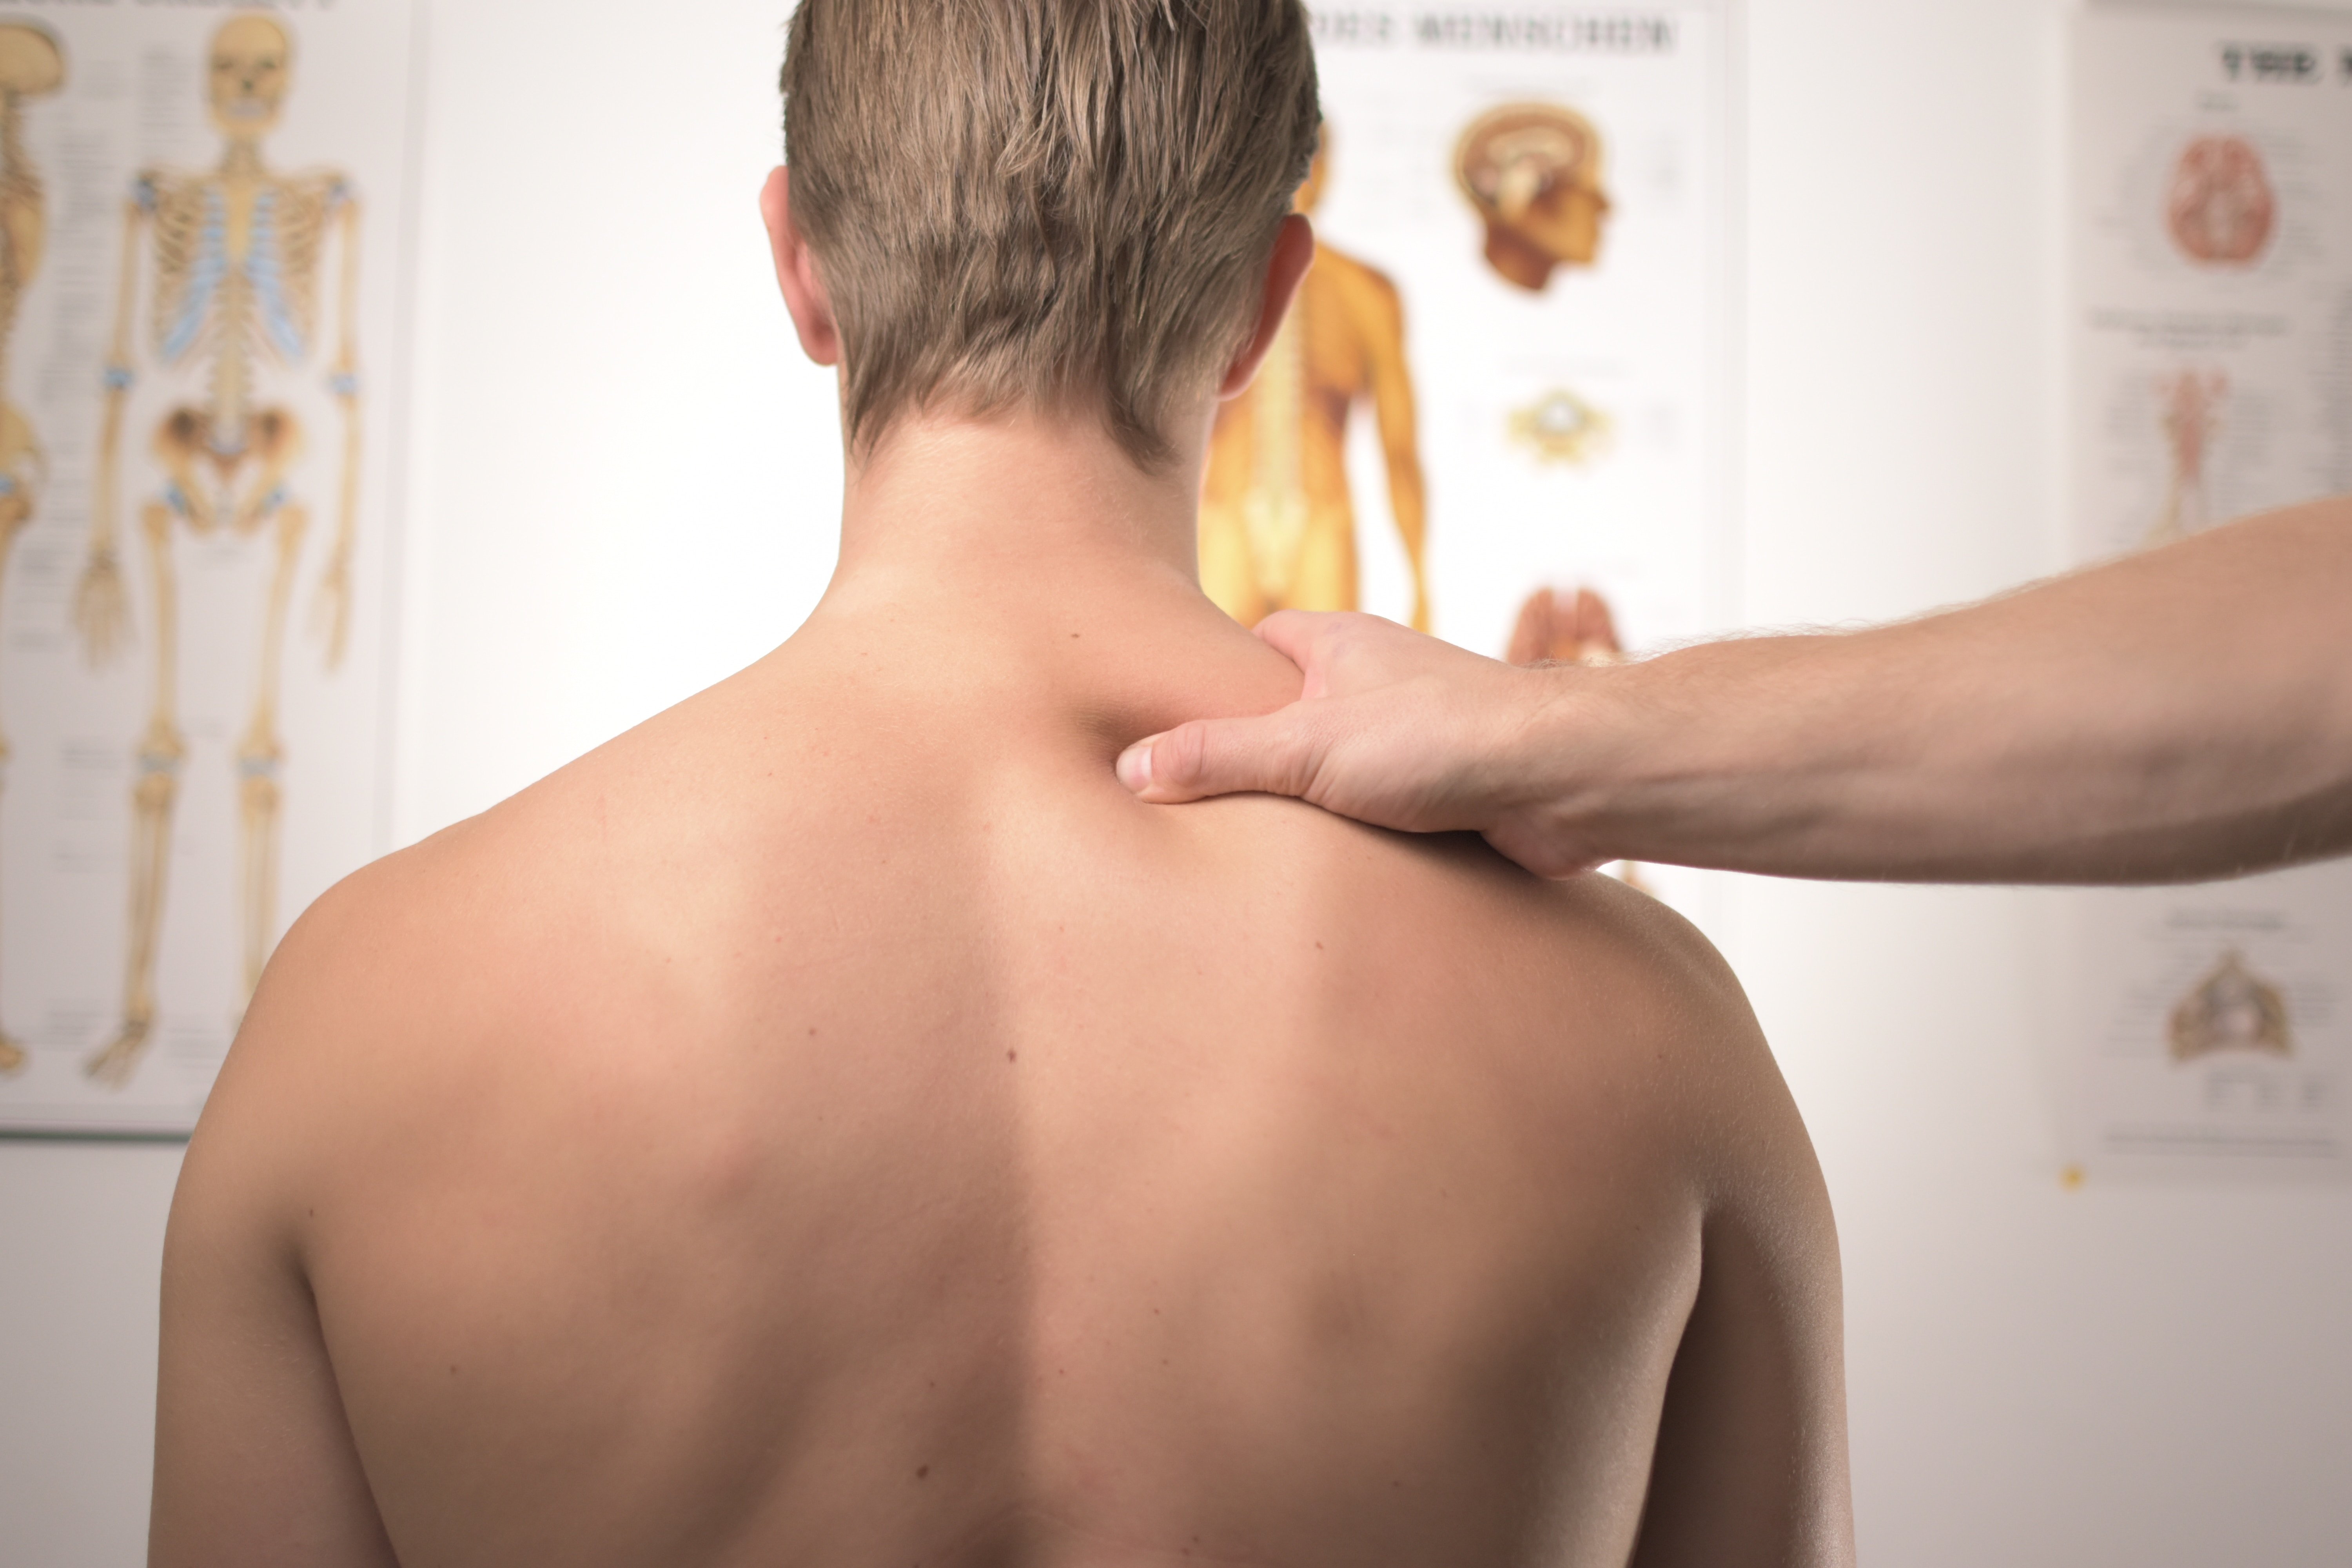 About Osteopathy. Horizontal shoulders